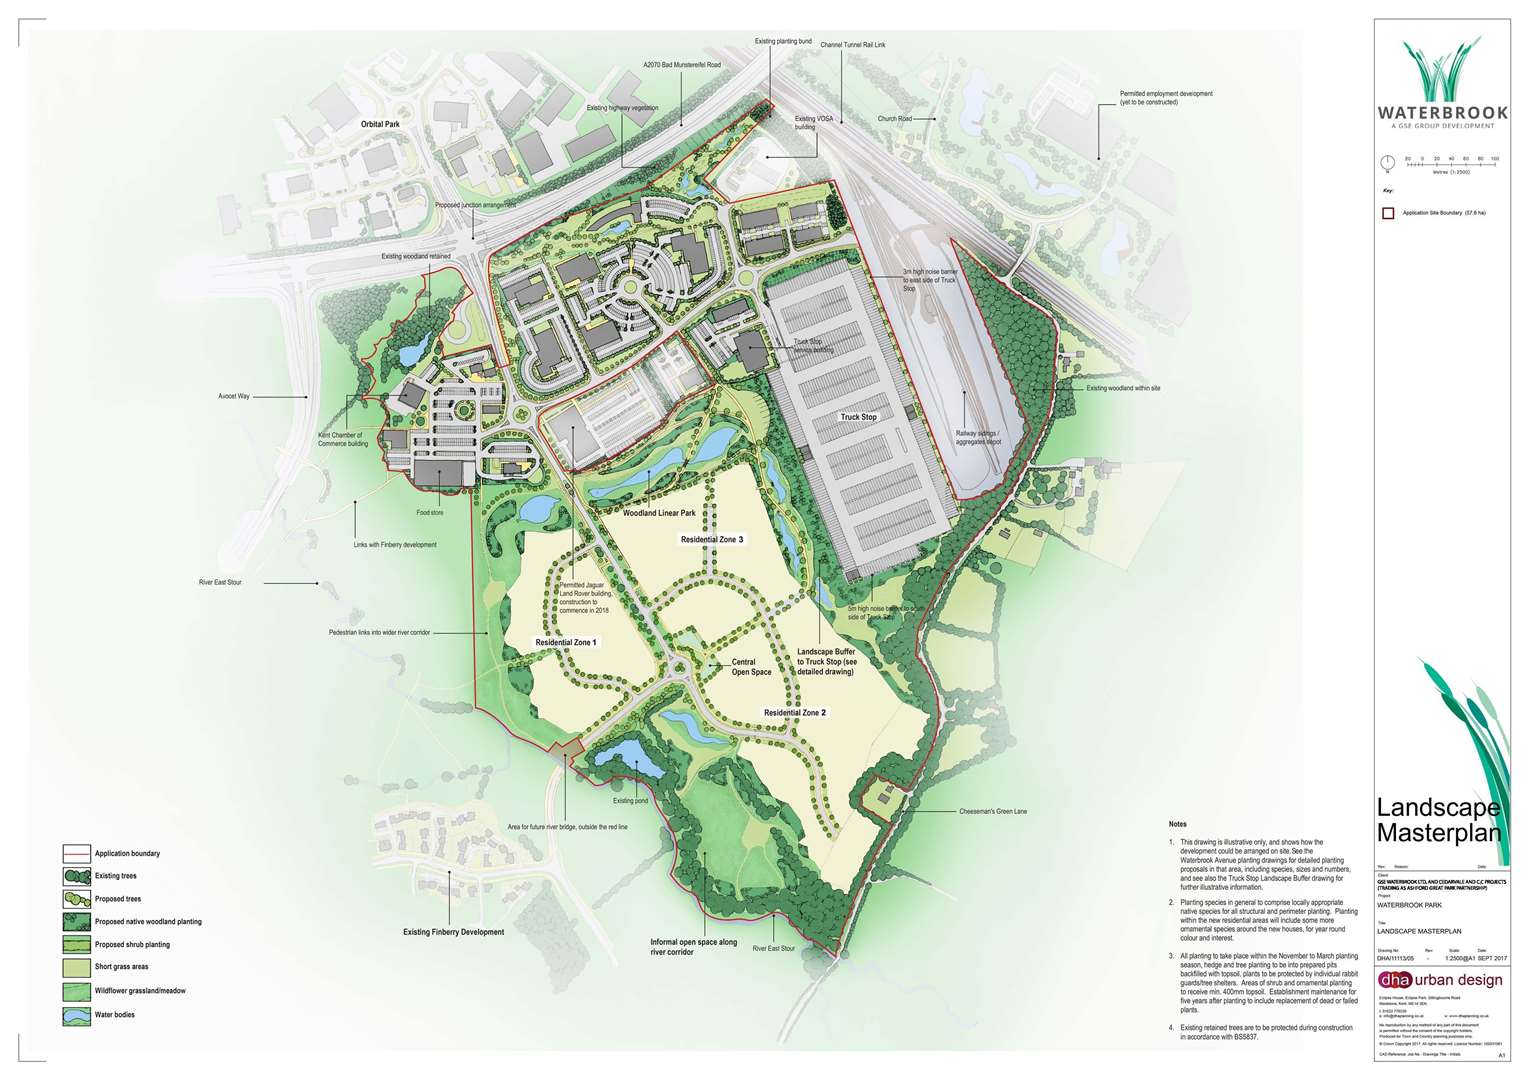 Masterplan for the Waterbrook site in Ashford